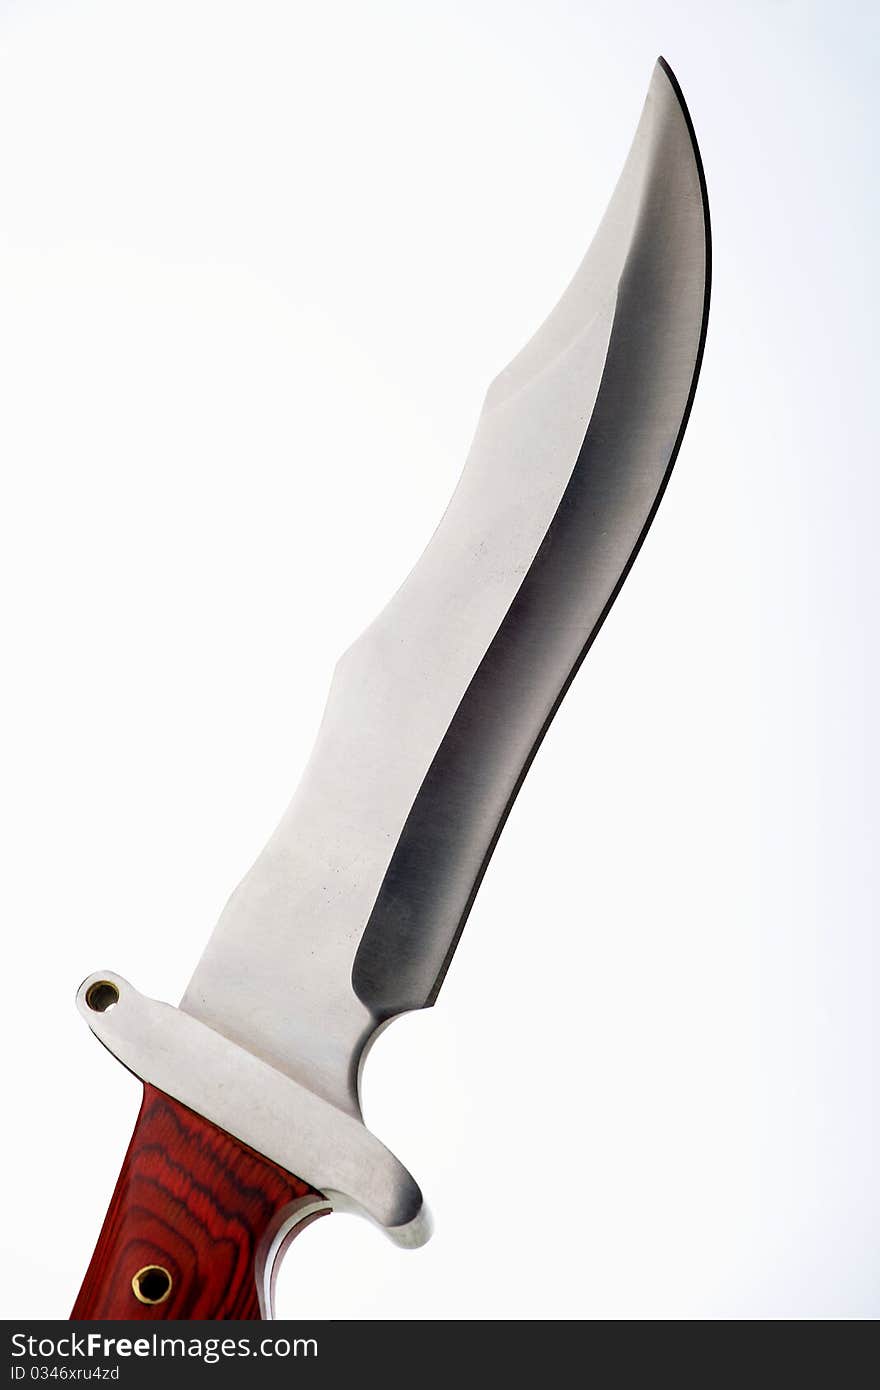 Hunting knife with wooden handle on a white background. Hunting knife with wooden handle on a white background